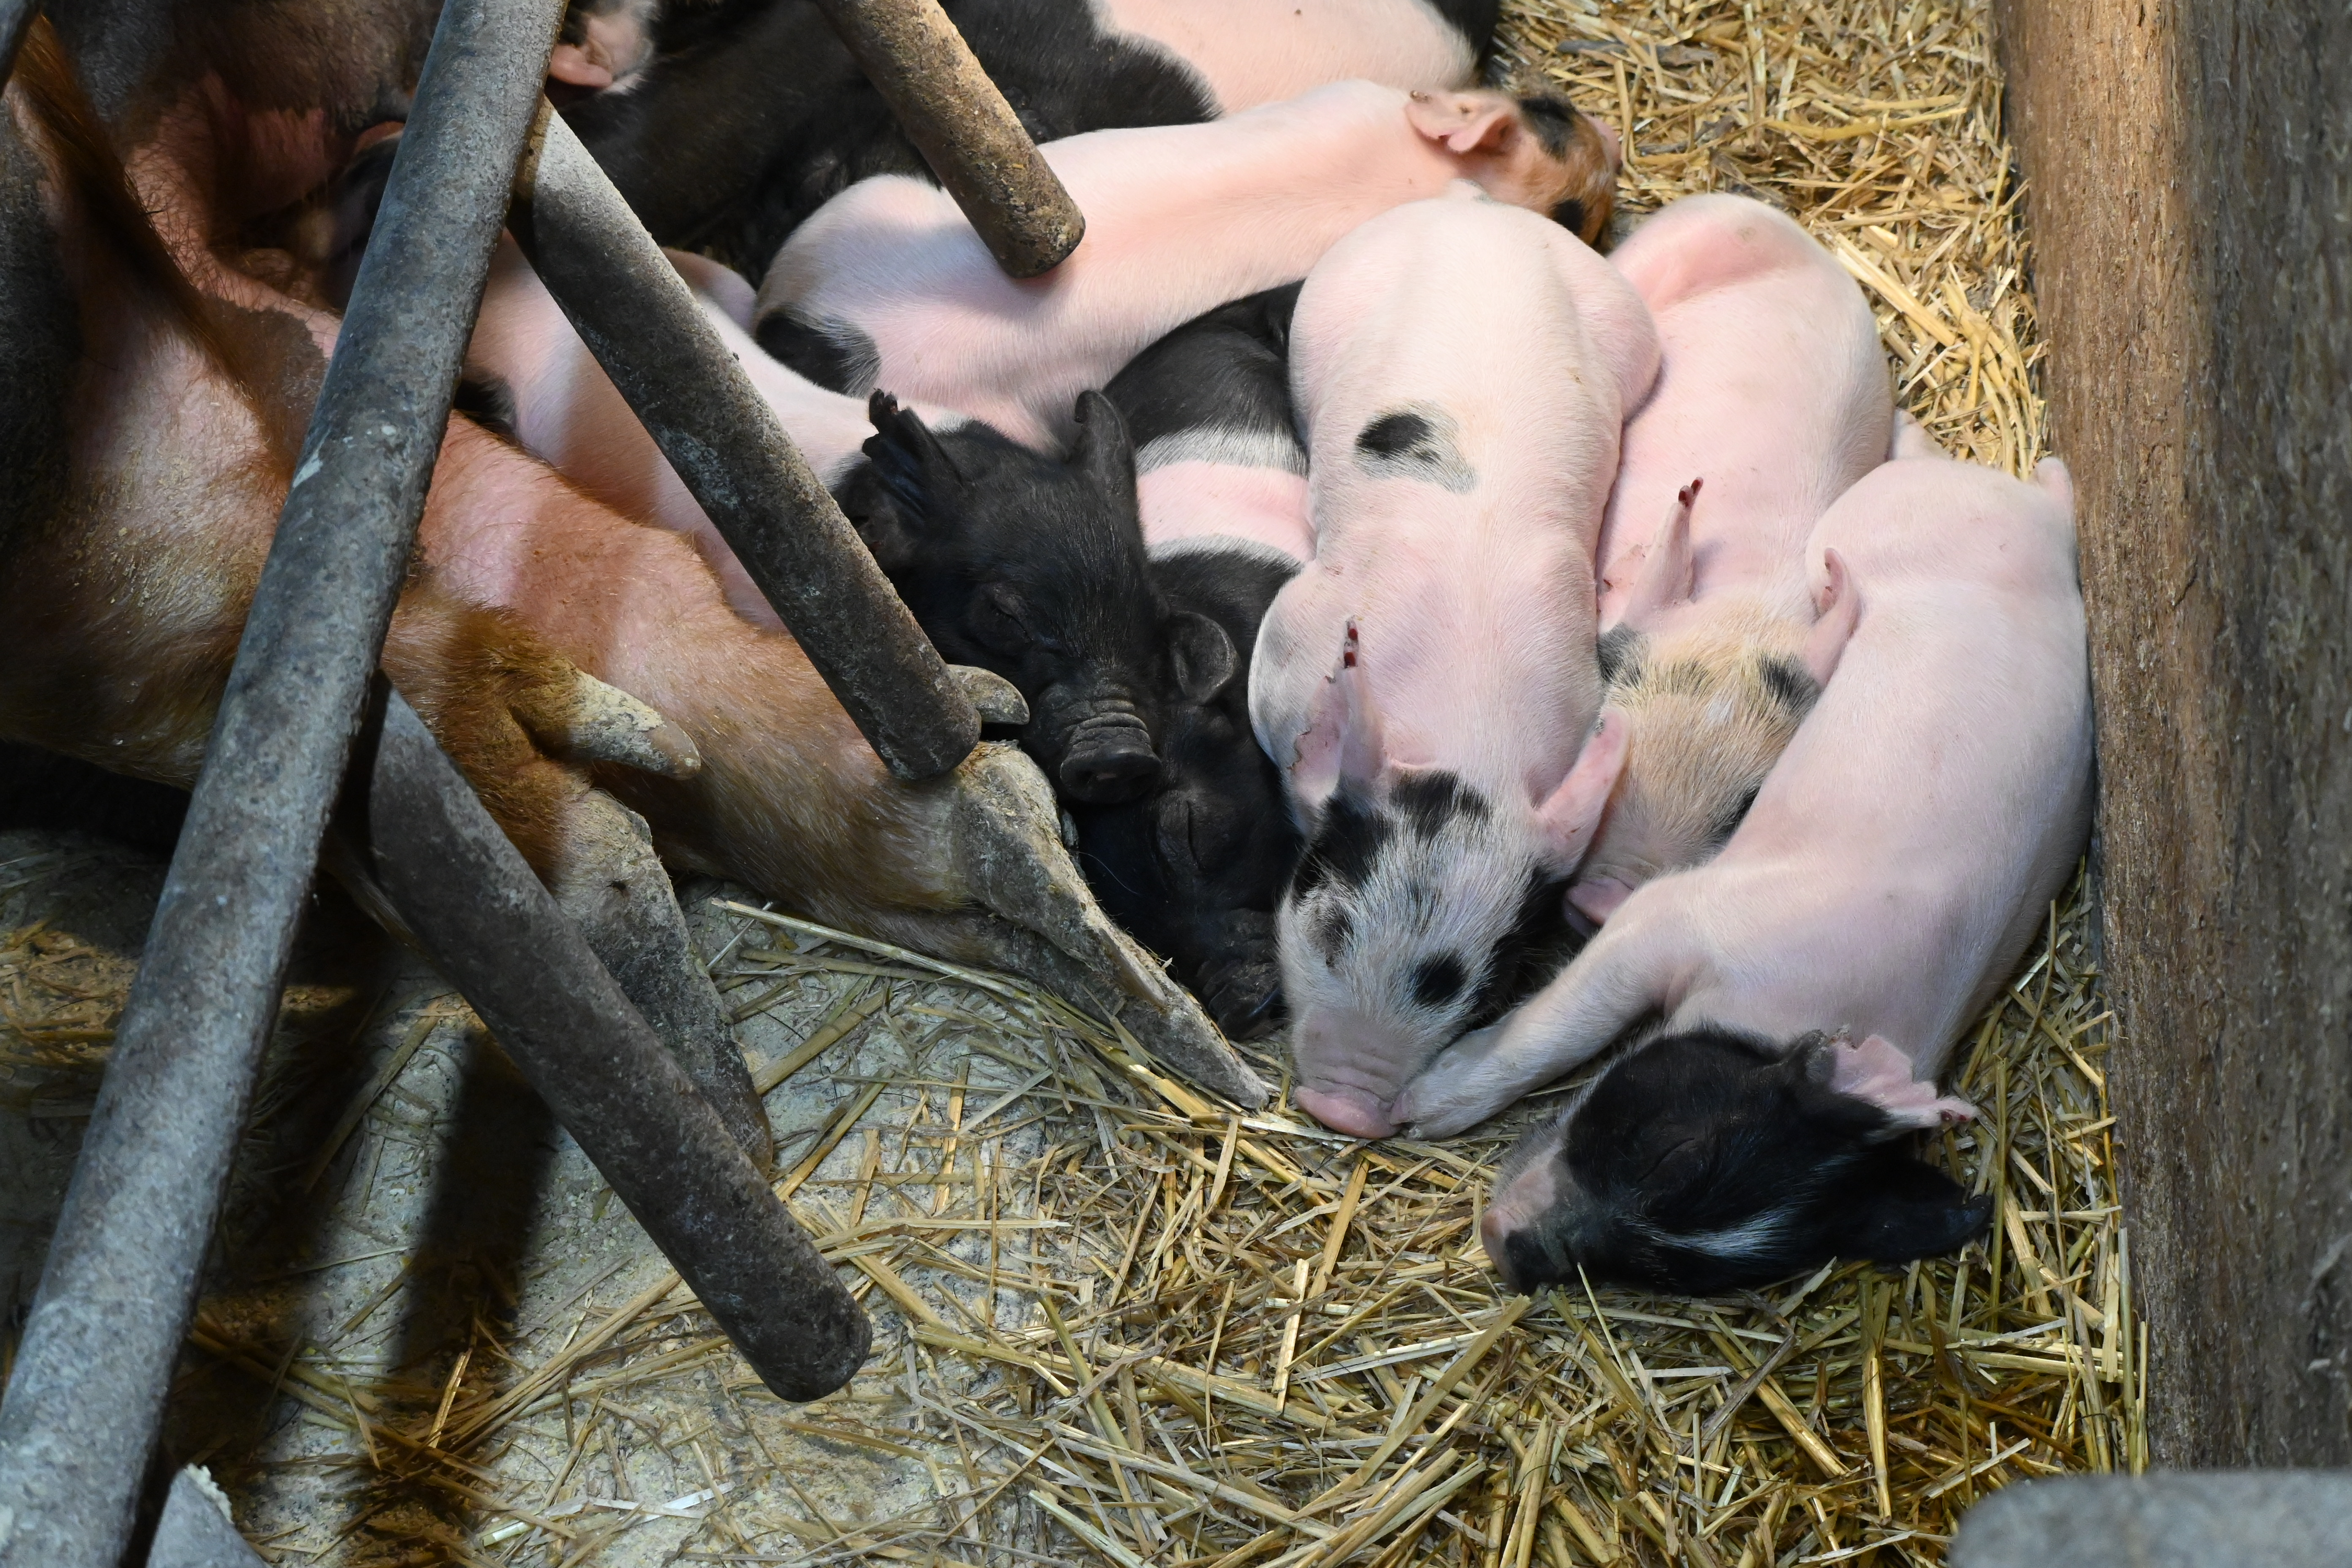 How is COVID-19 impacting pig farmers?